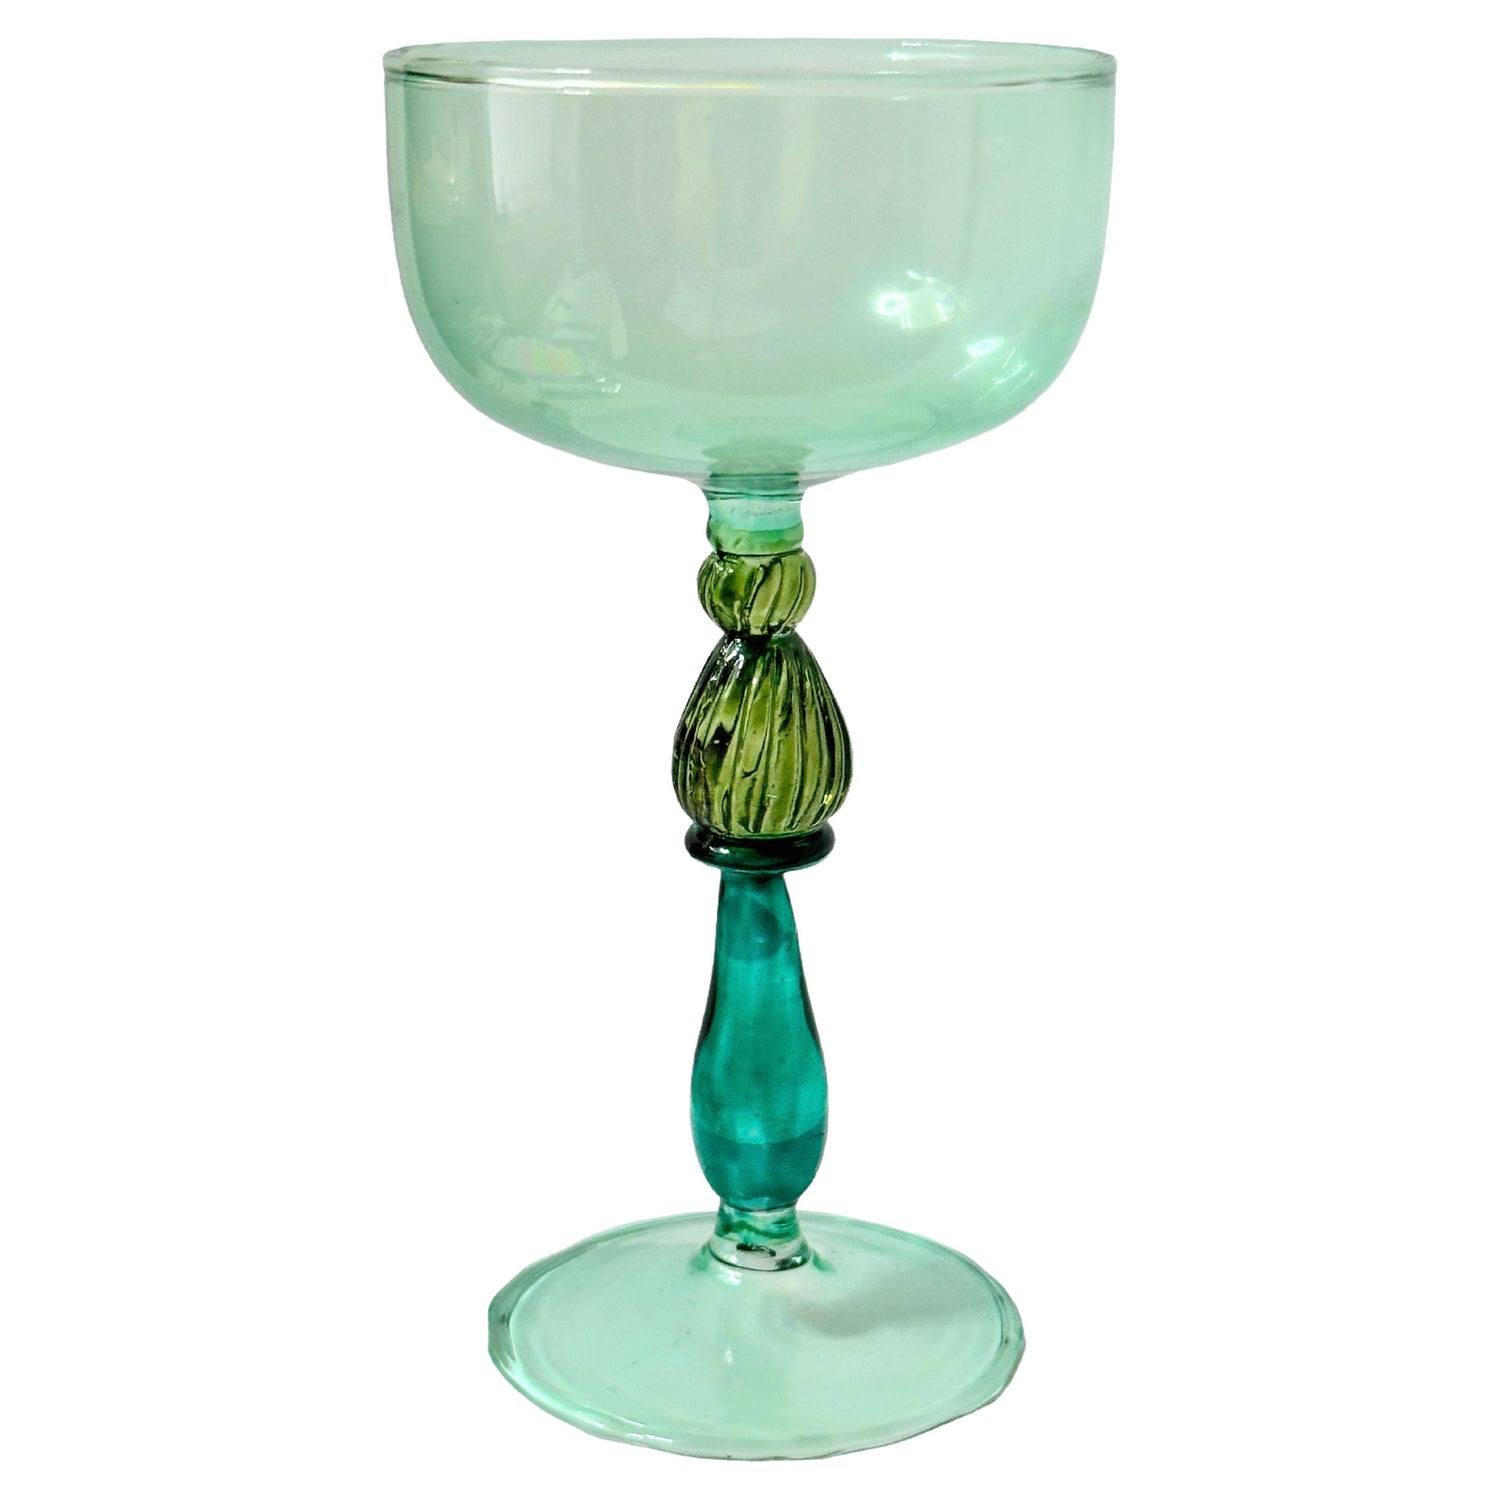 https://a.1stdibscdn.com/variations-of-green-salviati-murano-glass-liqueur-goblet-vintage-italy-for-sale/f_39981/f_366283821697363708316/f_36628382_1697363709626_bg_processed.jpg?width=1500